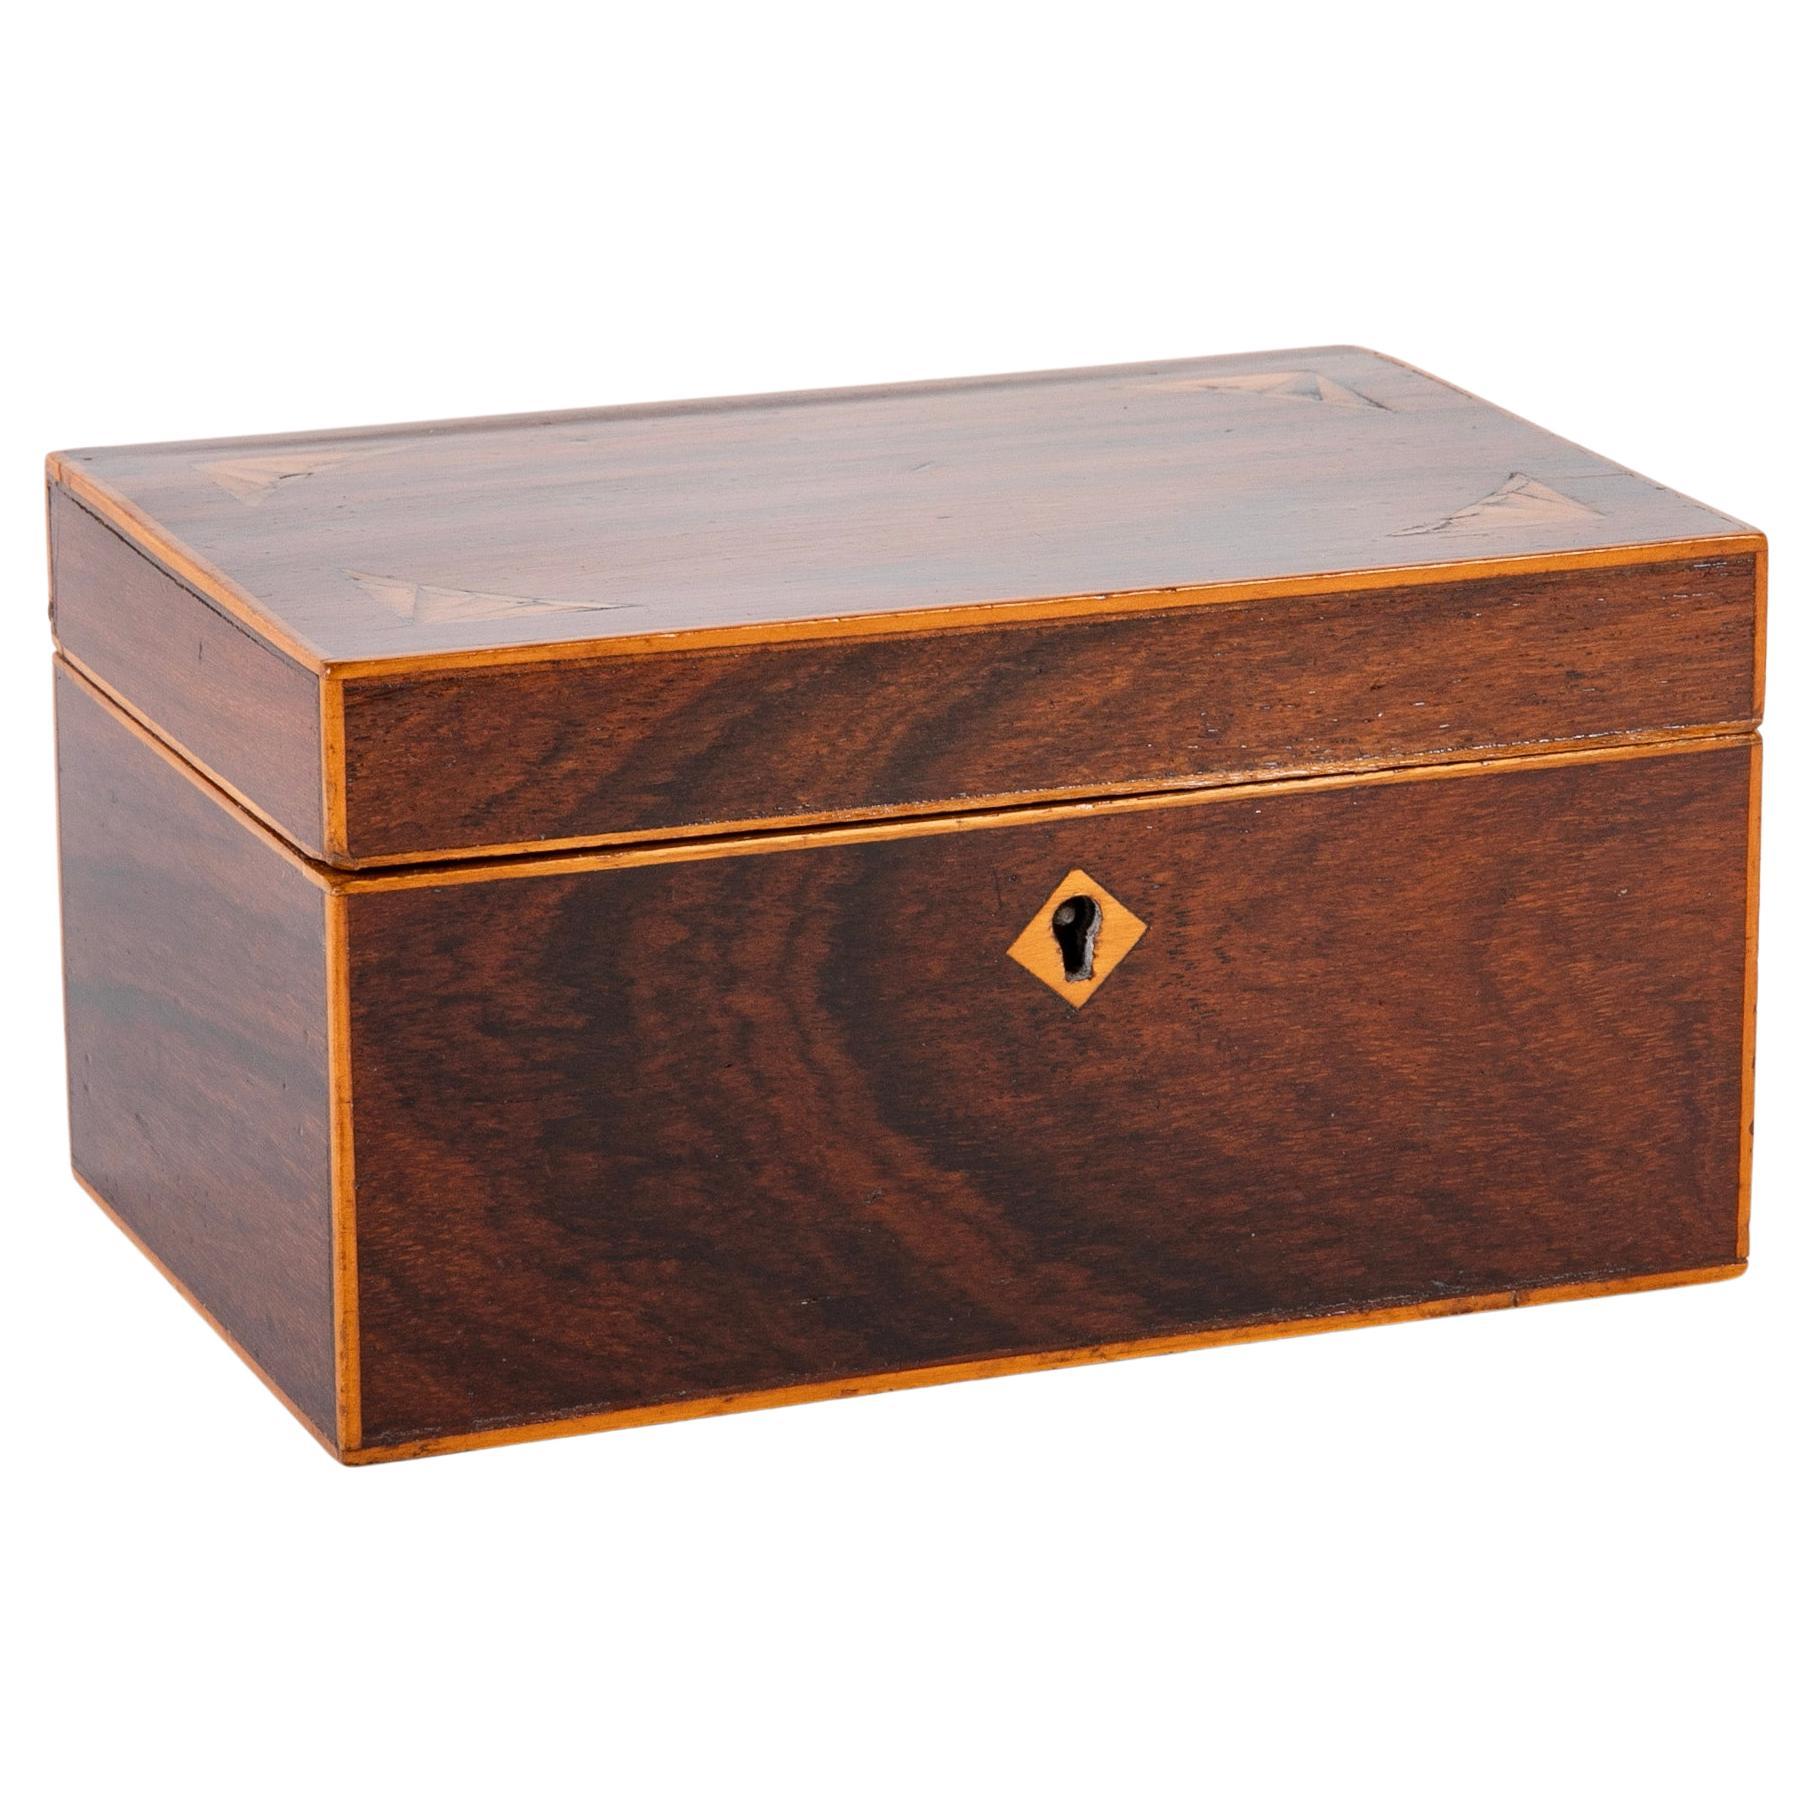 English Regency mahogany box with satinwood inlay. The four corners of the top are inlaid with lovely triangular scalloped decoration. All the border molding are also satinwood inlay as well as the diamond shaped keyhole escutcheon. A sweet little